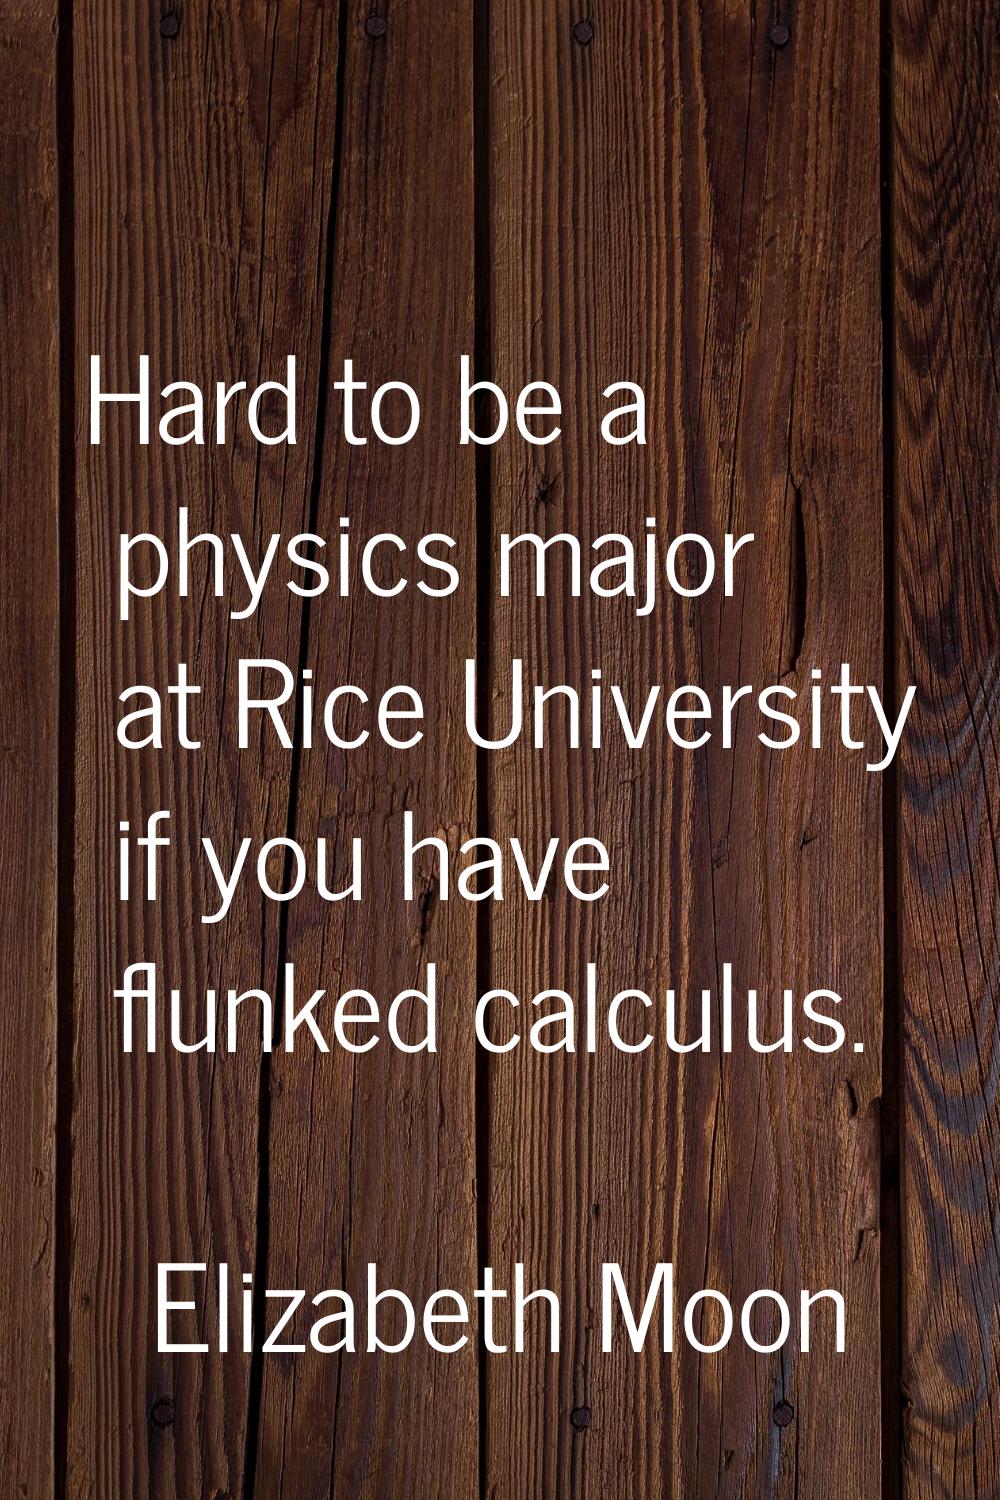 Hard to be a physics major at Rice University if you have flunked calculus.